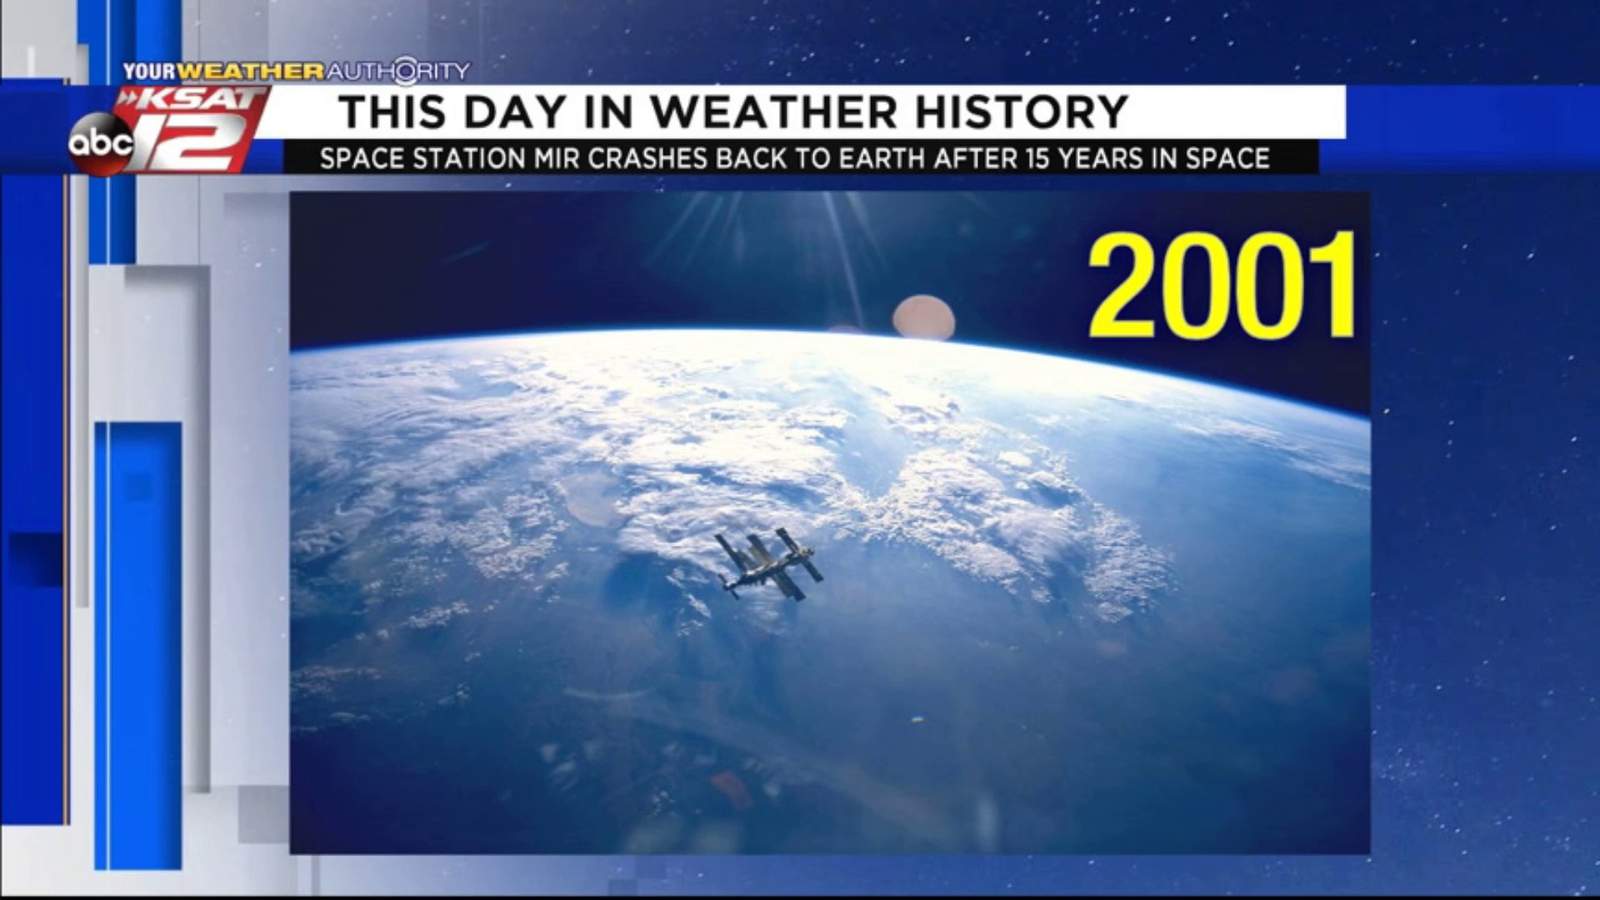 This Day in Weather History: March 23rd